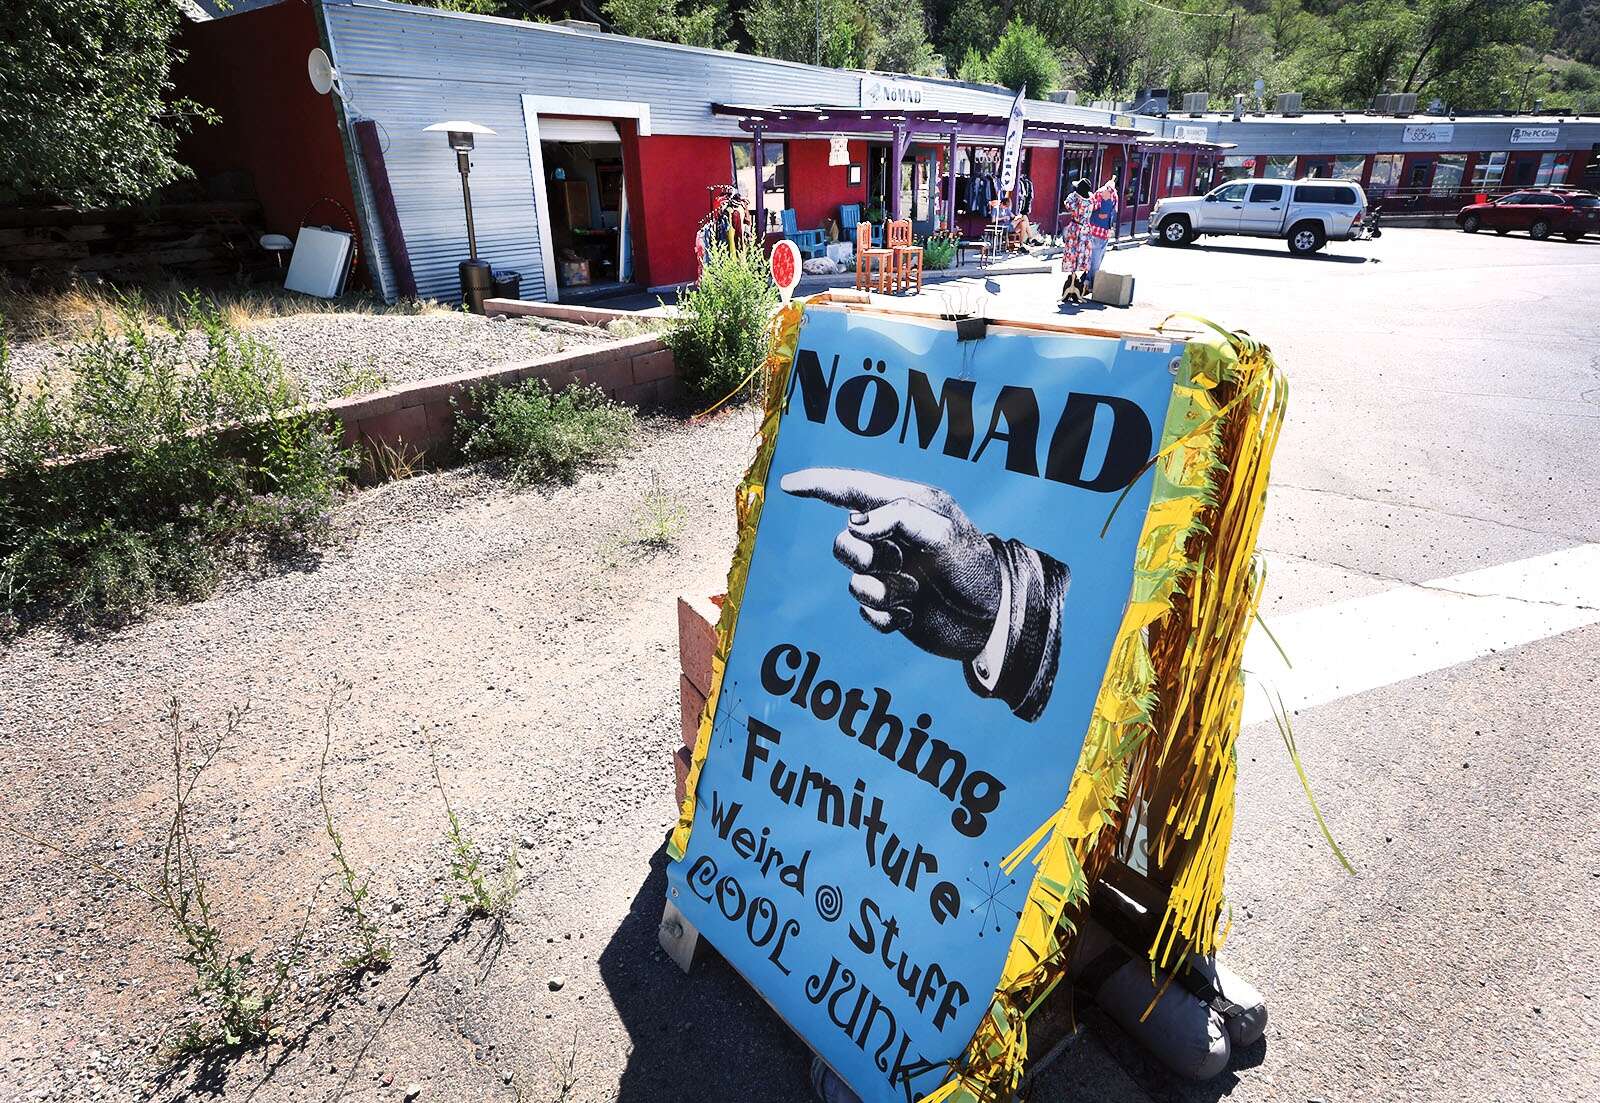 Thrift store fans should feel right at home in NoMAD – The Durango Herald ?uuid=e0f6a41e 4fd6 5774 8b34 5cfcc88e0e36&function=cover&type=preview&source=false&width=1600&height=1103